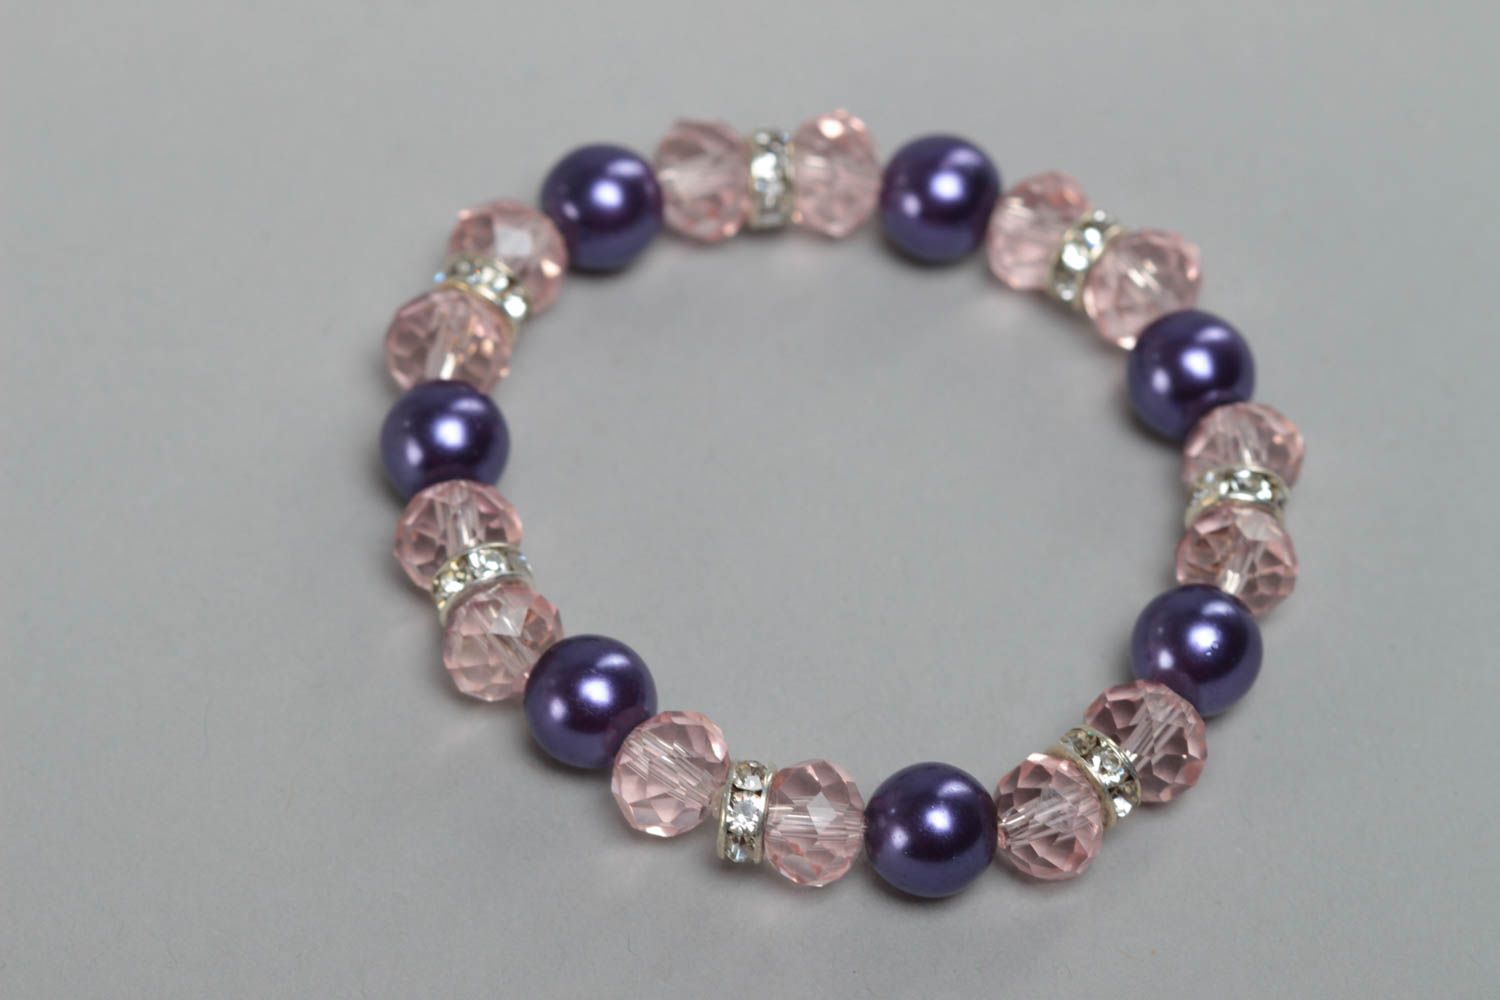 Handmade children's pink wrist bracelet with crystal and ceramic beads photo 2